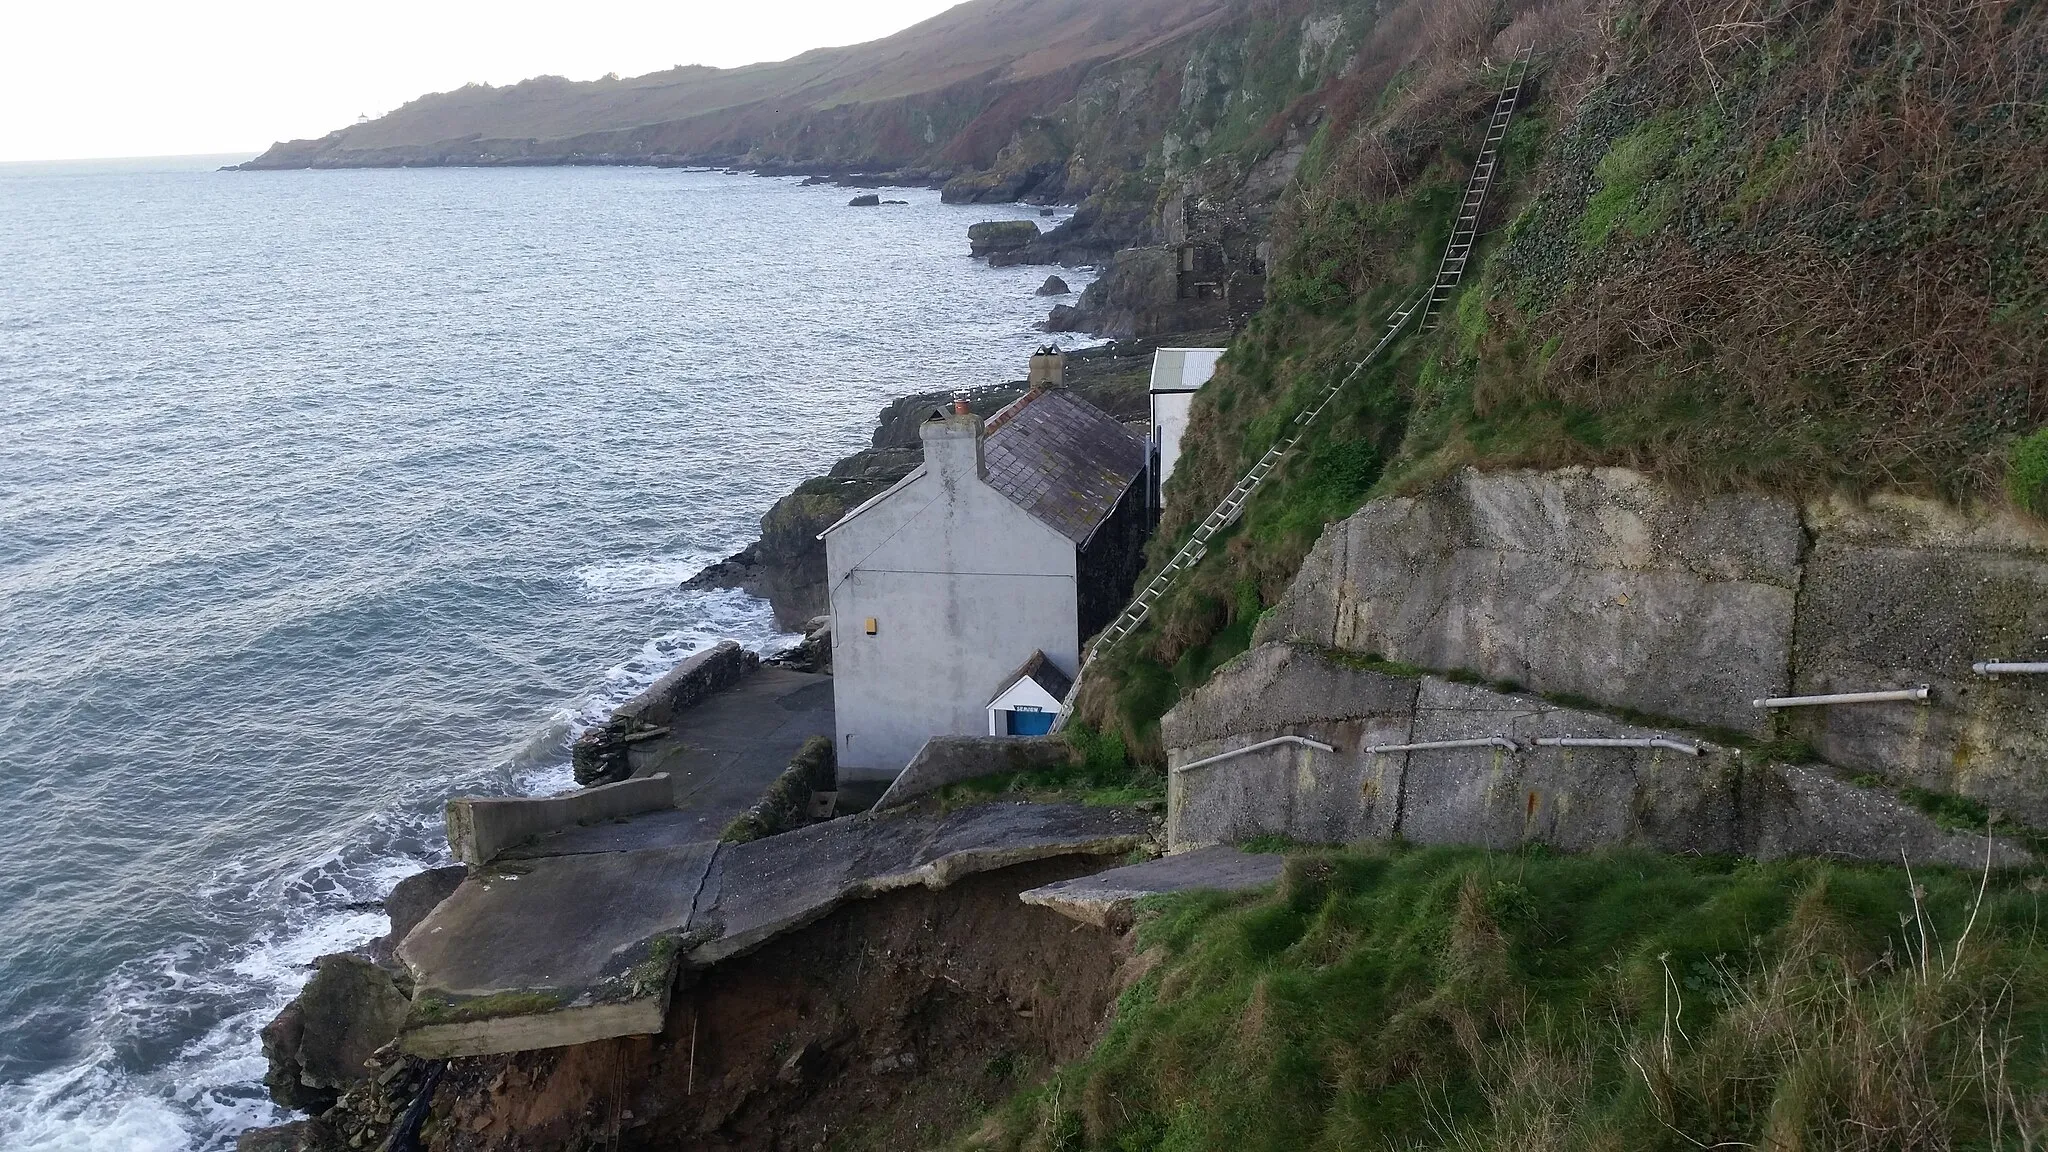 Photo showing: The ruined village of Hallsands in Devon, England. The village was the victim of erosion by the sea and was never rebuilt. Ladders from the clifftop are visible, the main path having fallen away. Start Point and its lighthouse can be seen in the background.